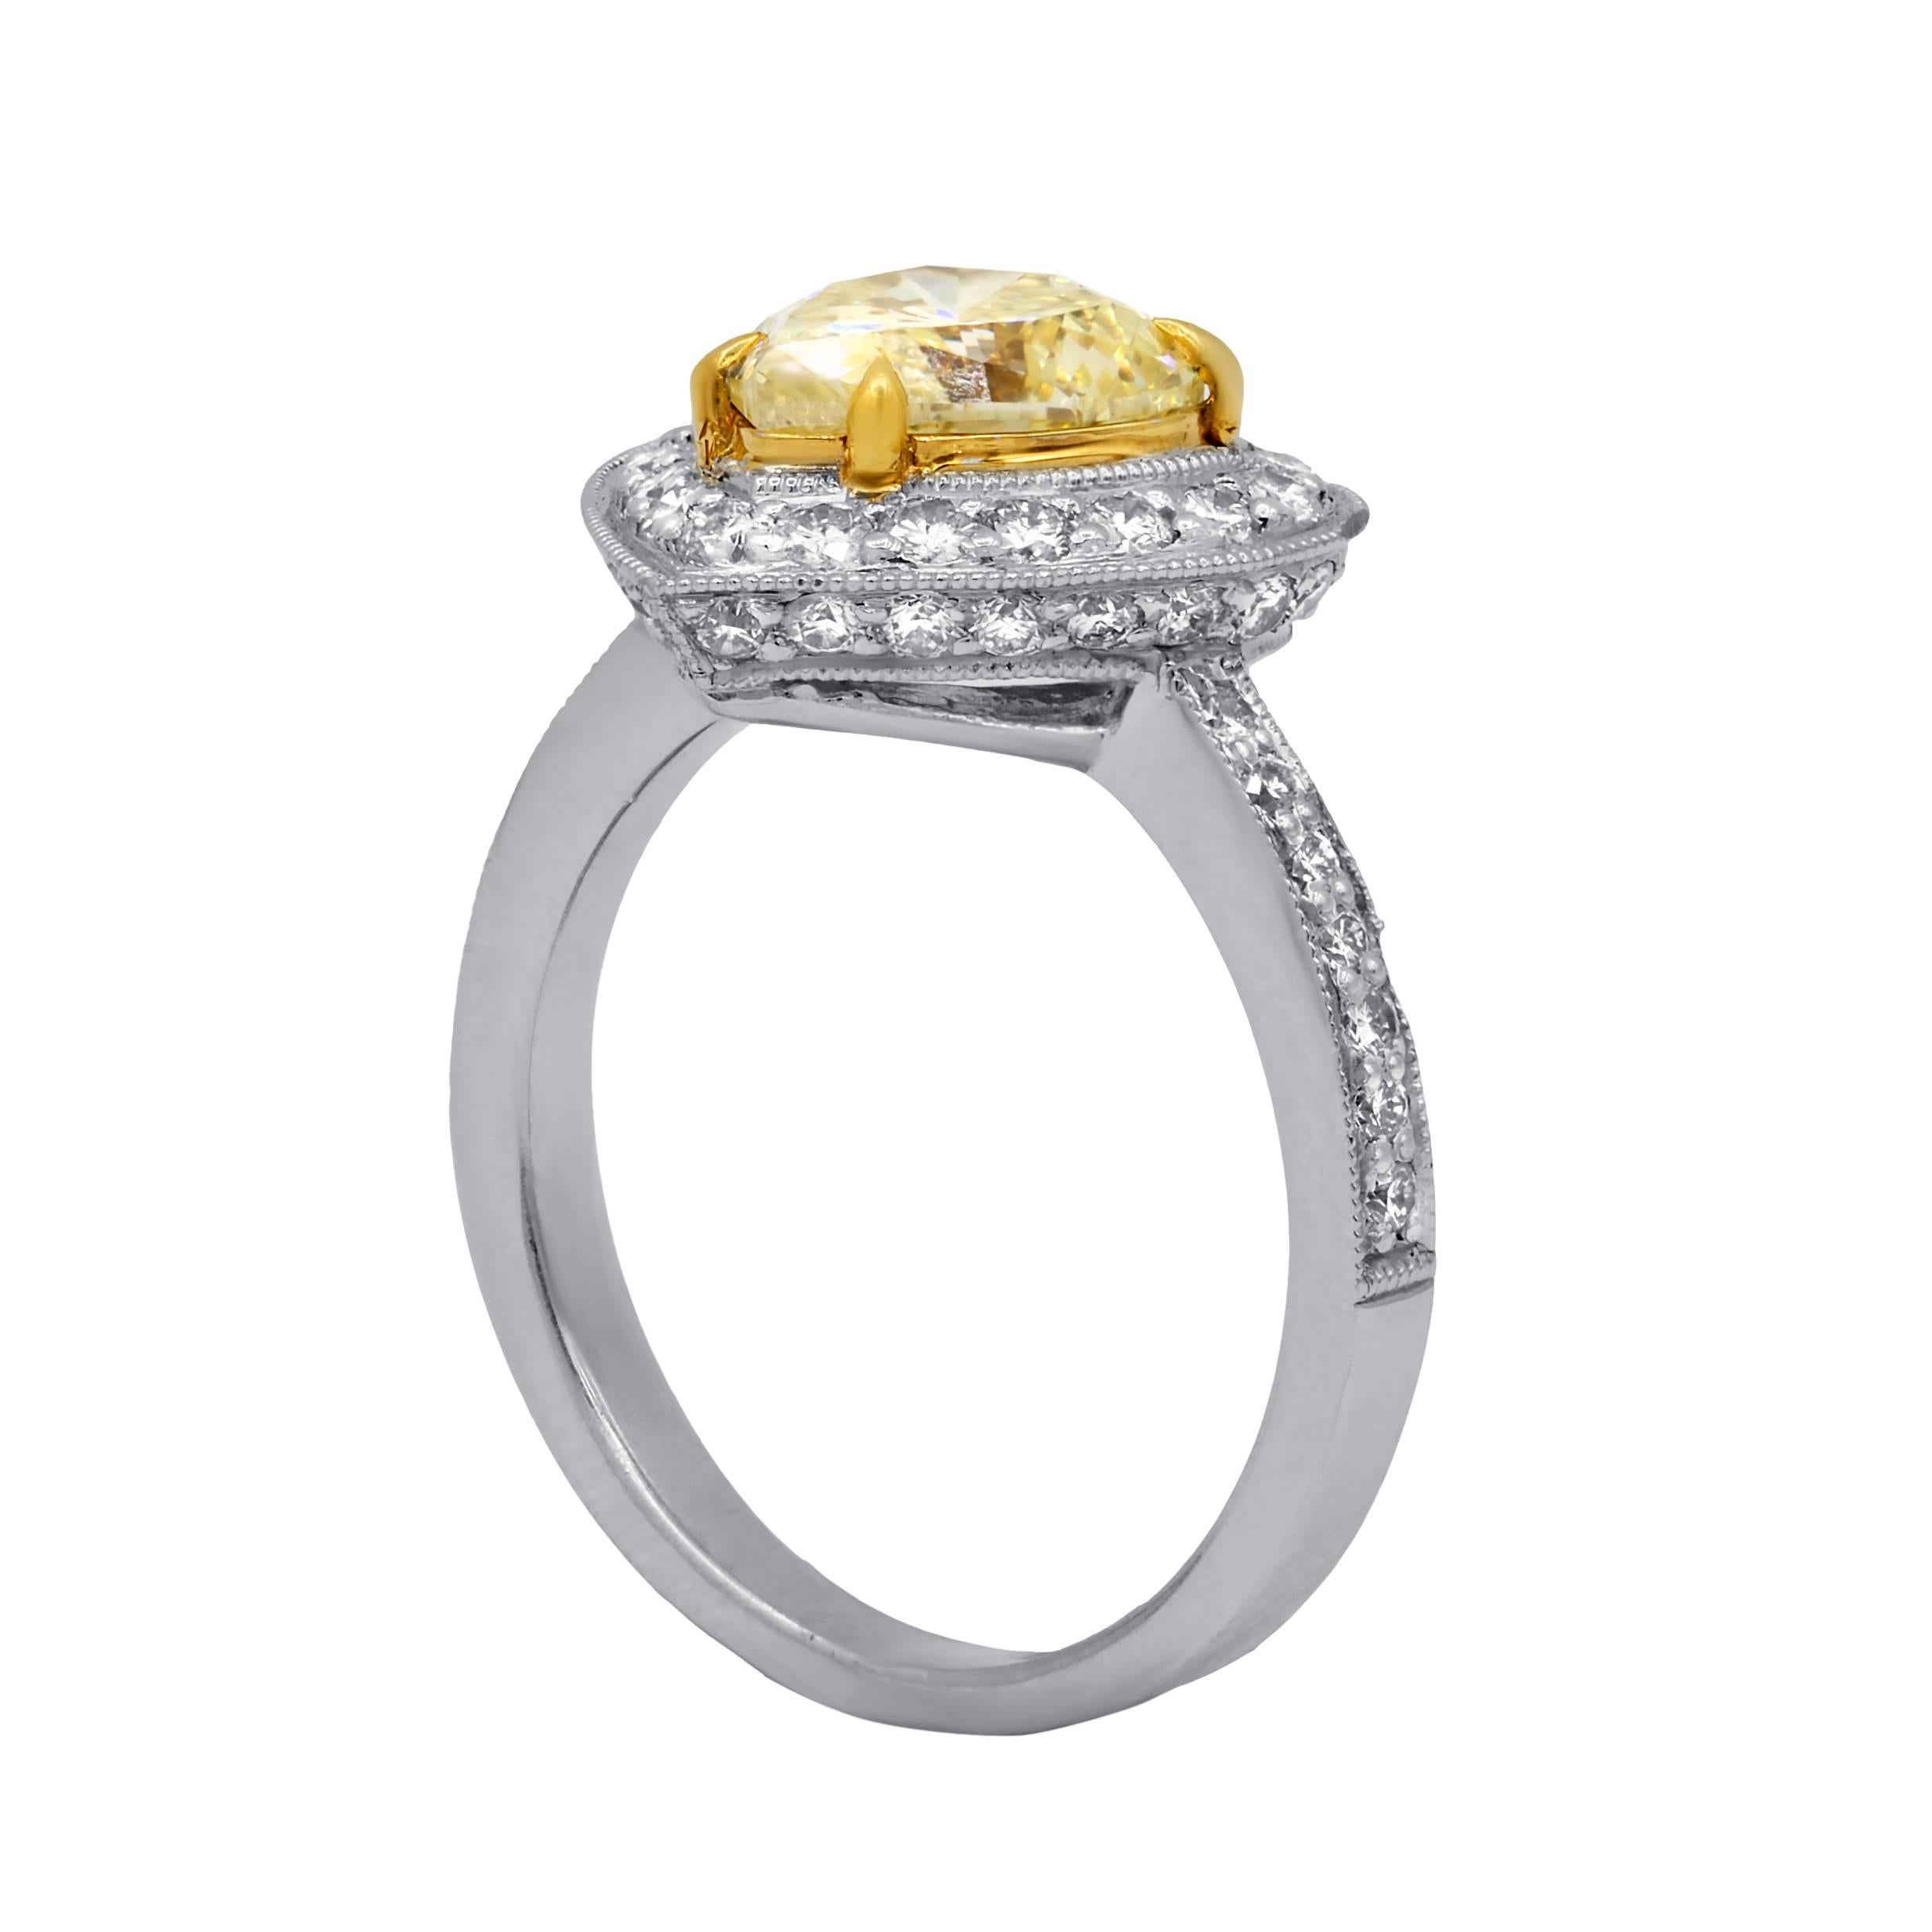 Exceptional   diamond engagement ring in 18 karat white gold mounting. 
The main GIA certified stone features natural fancy yellow heart brilliant cut ,weighing 2.00 cts  set in halo setting and enhanced by 1.00 cts total round cut diamonds.

•